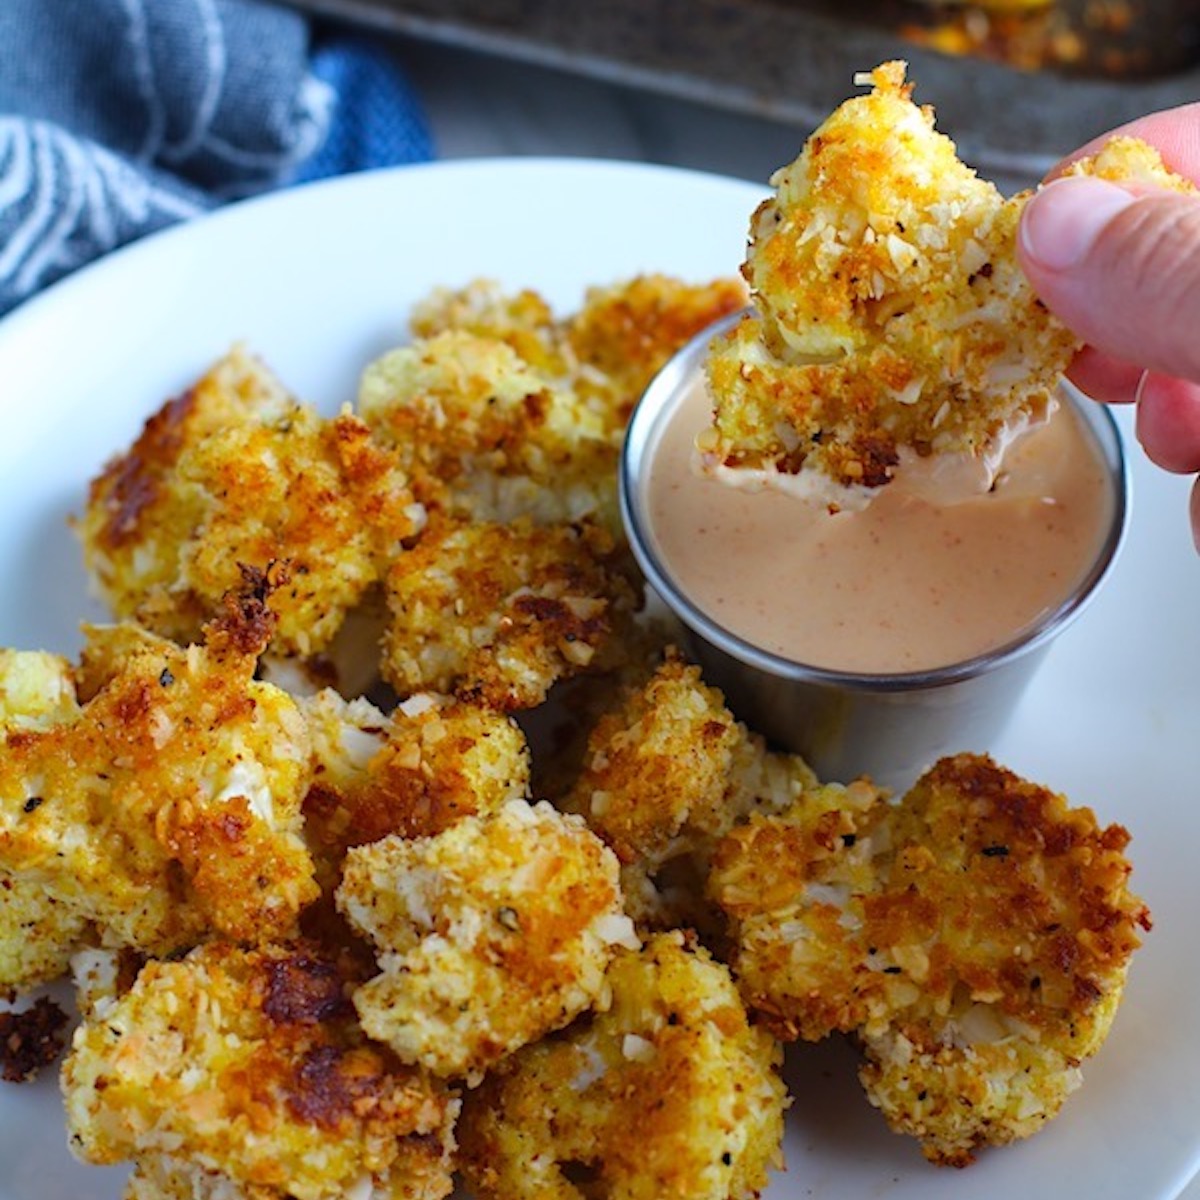 Baked Breaded Cauliflower Recipe {with Sriracha Mayo Dipping Sauce} - Talking Meals